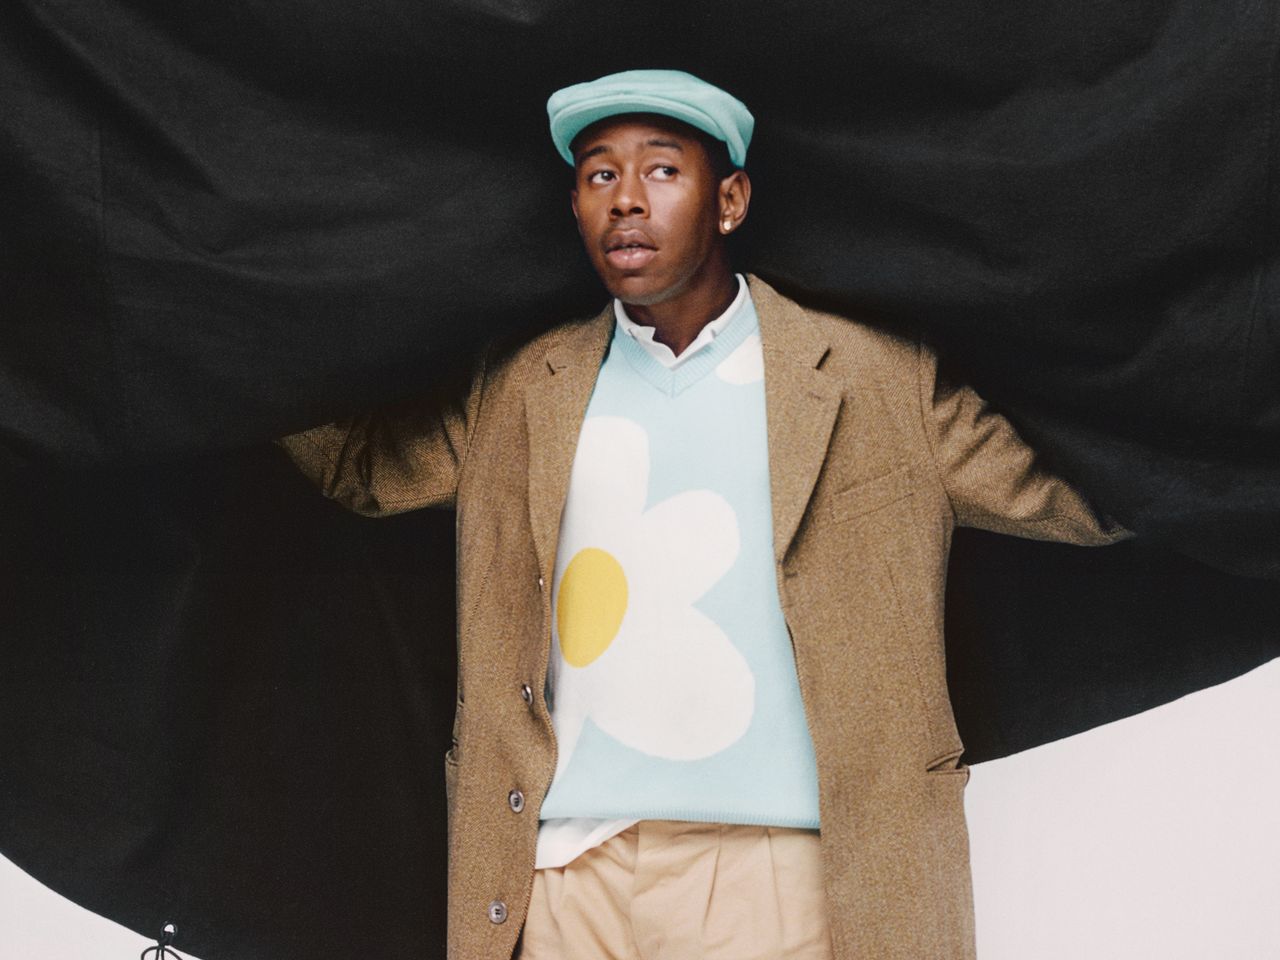 Tyler, the Creator as a Fashion Influence